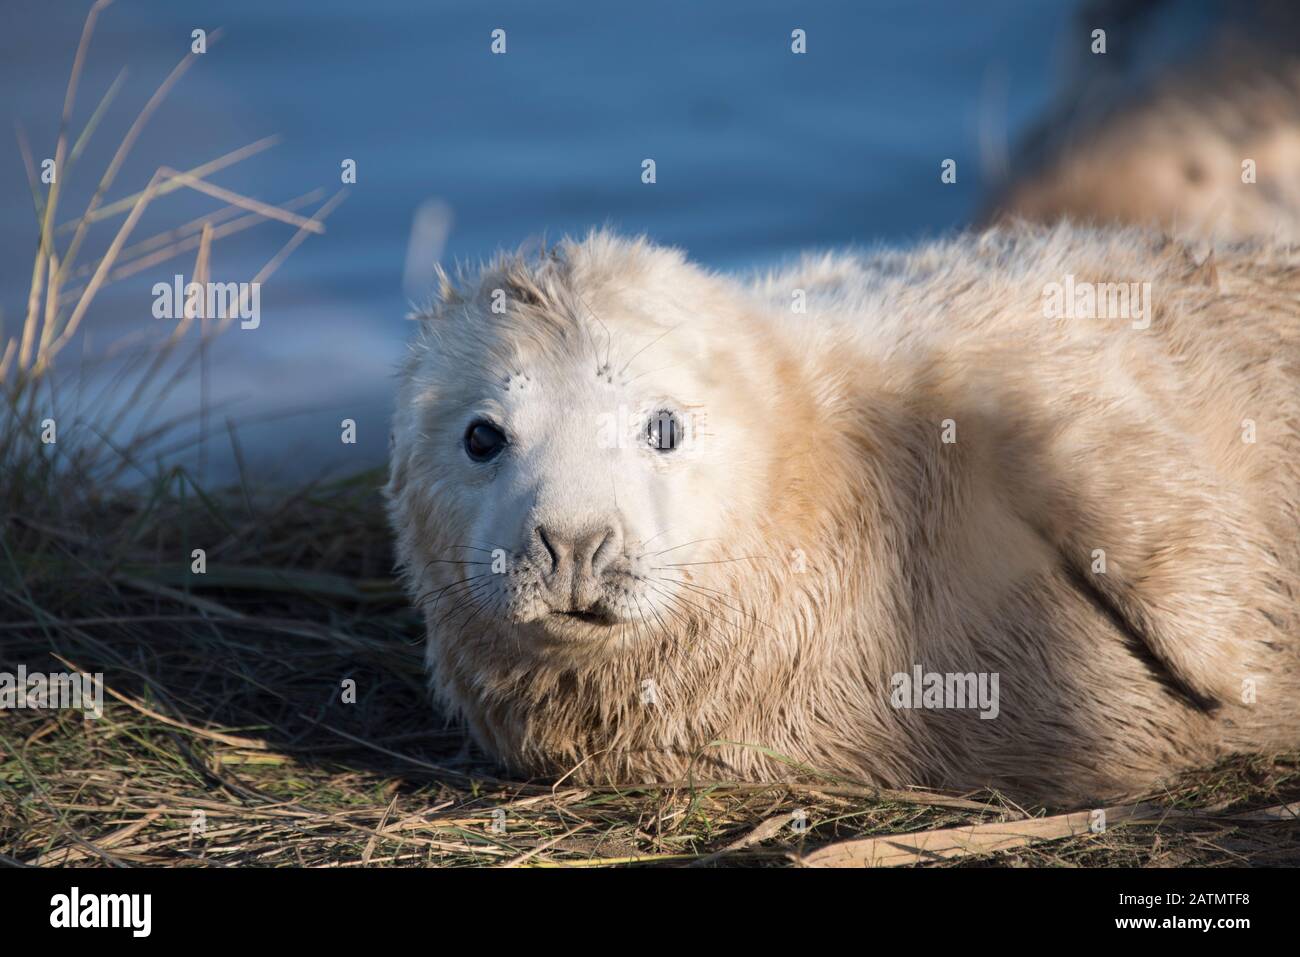 Donna Nook, Lincolnshire, UK – Nov 16 : Close up on the face of a cute fluffy newborn baby grey seal pup lying in the grass 16 Nov 2016 at Donna Nook Stock Photo